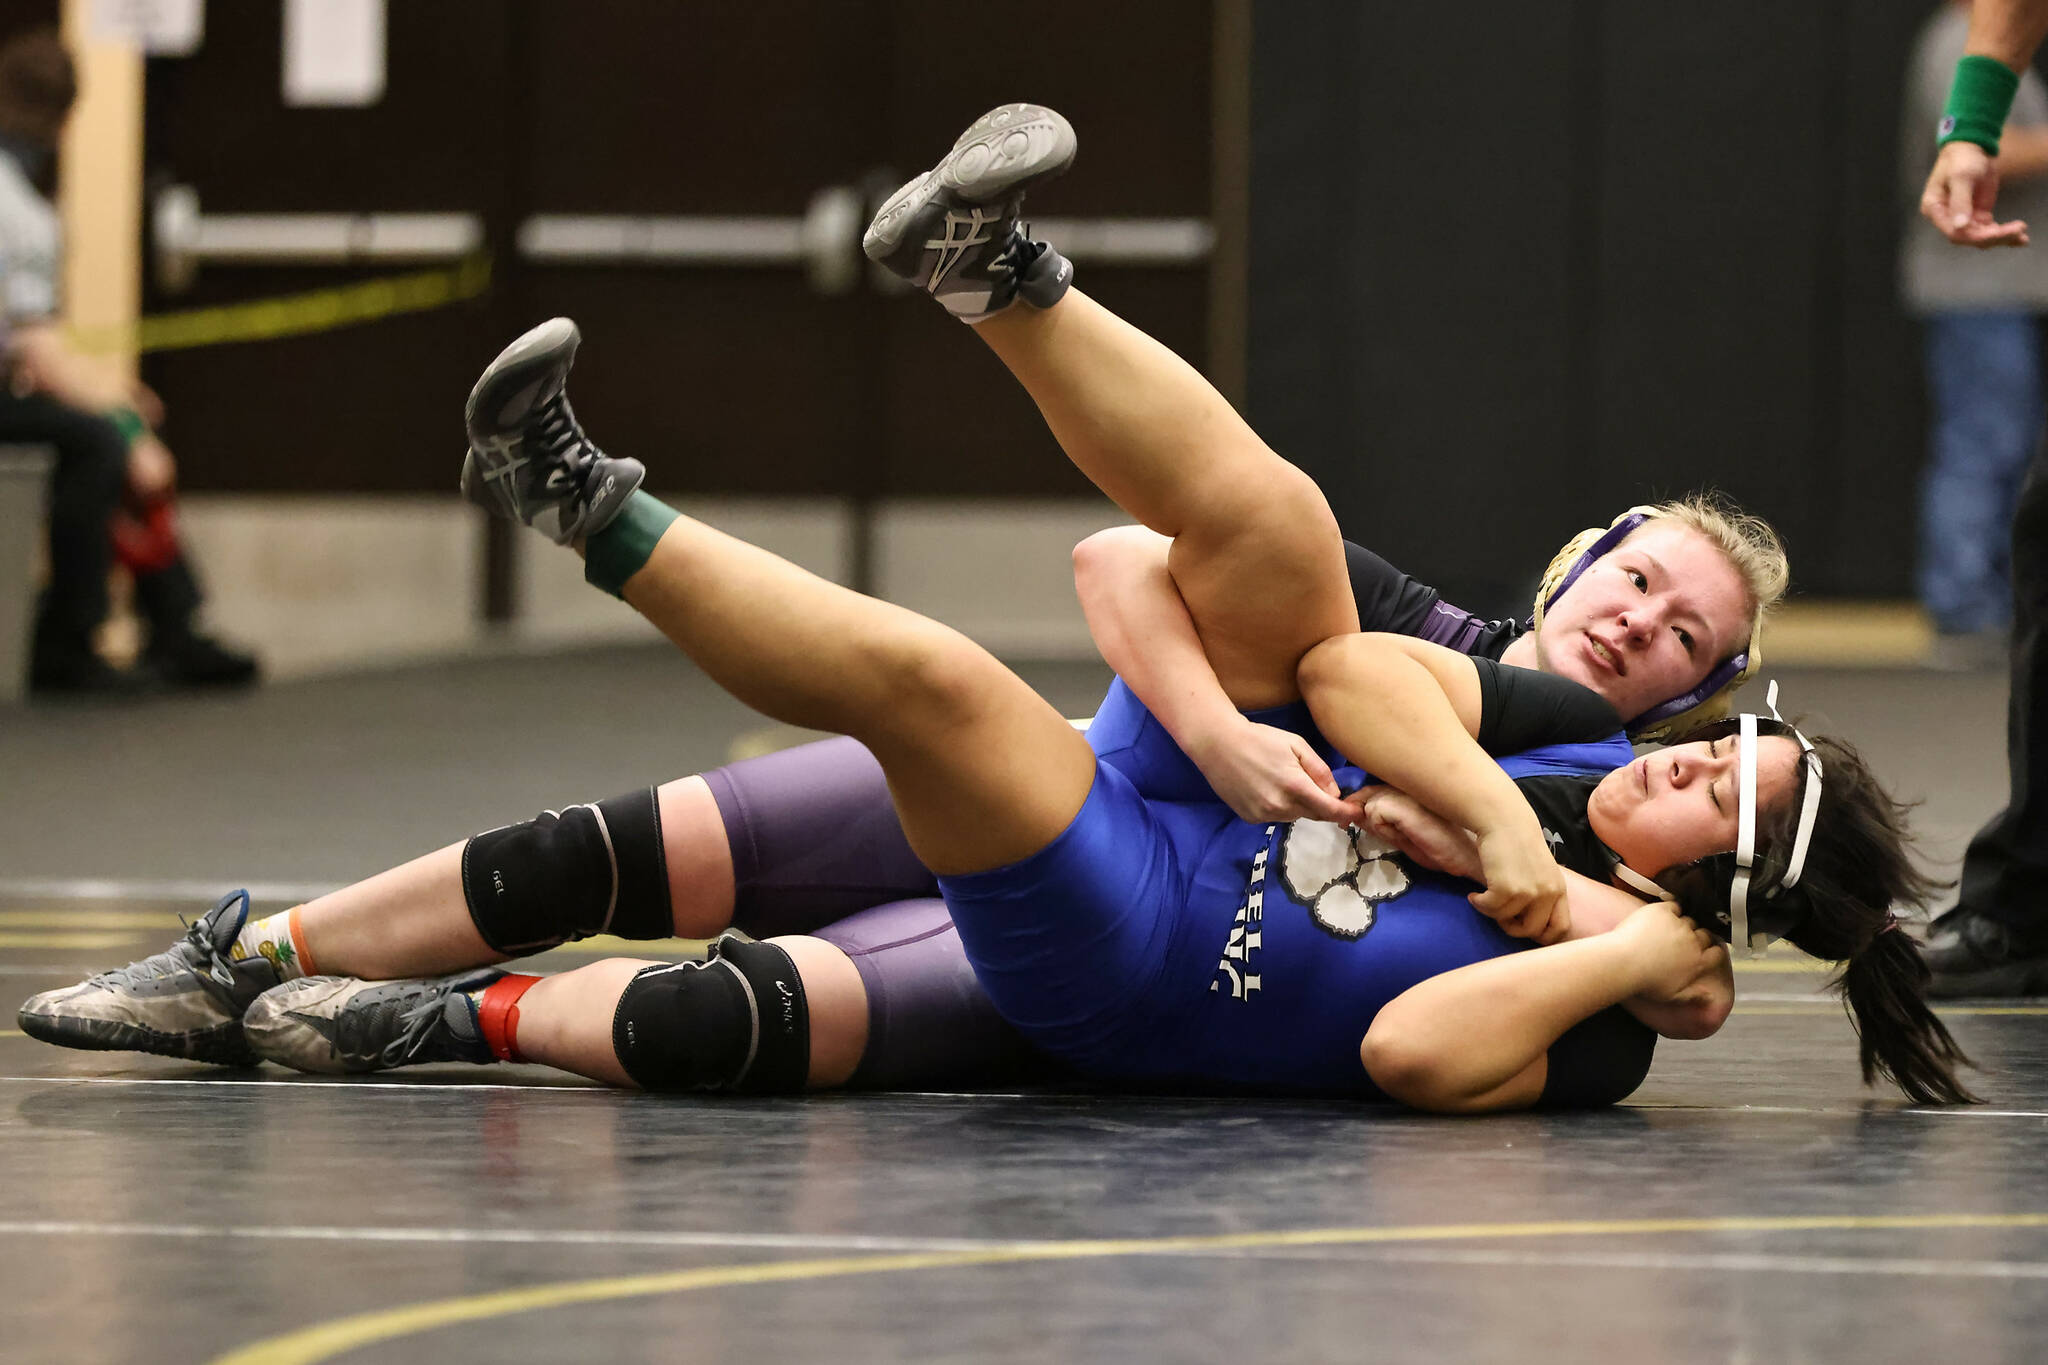 Photo by John Fisken
Team captain and senior Alyssia Grose competes at sub-regionals Feb. 4 in Meridian. She took second place in her weight class.